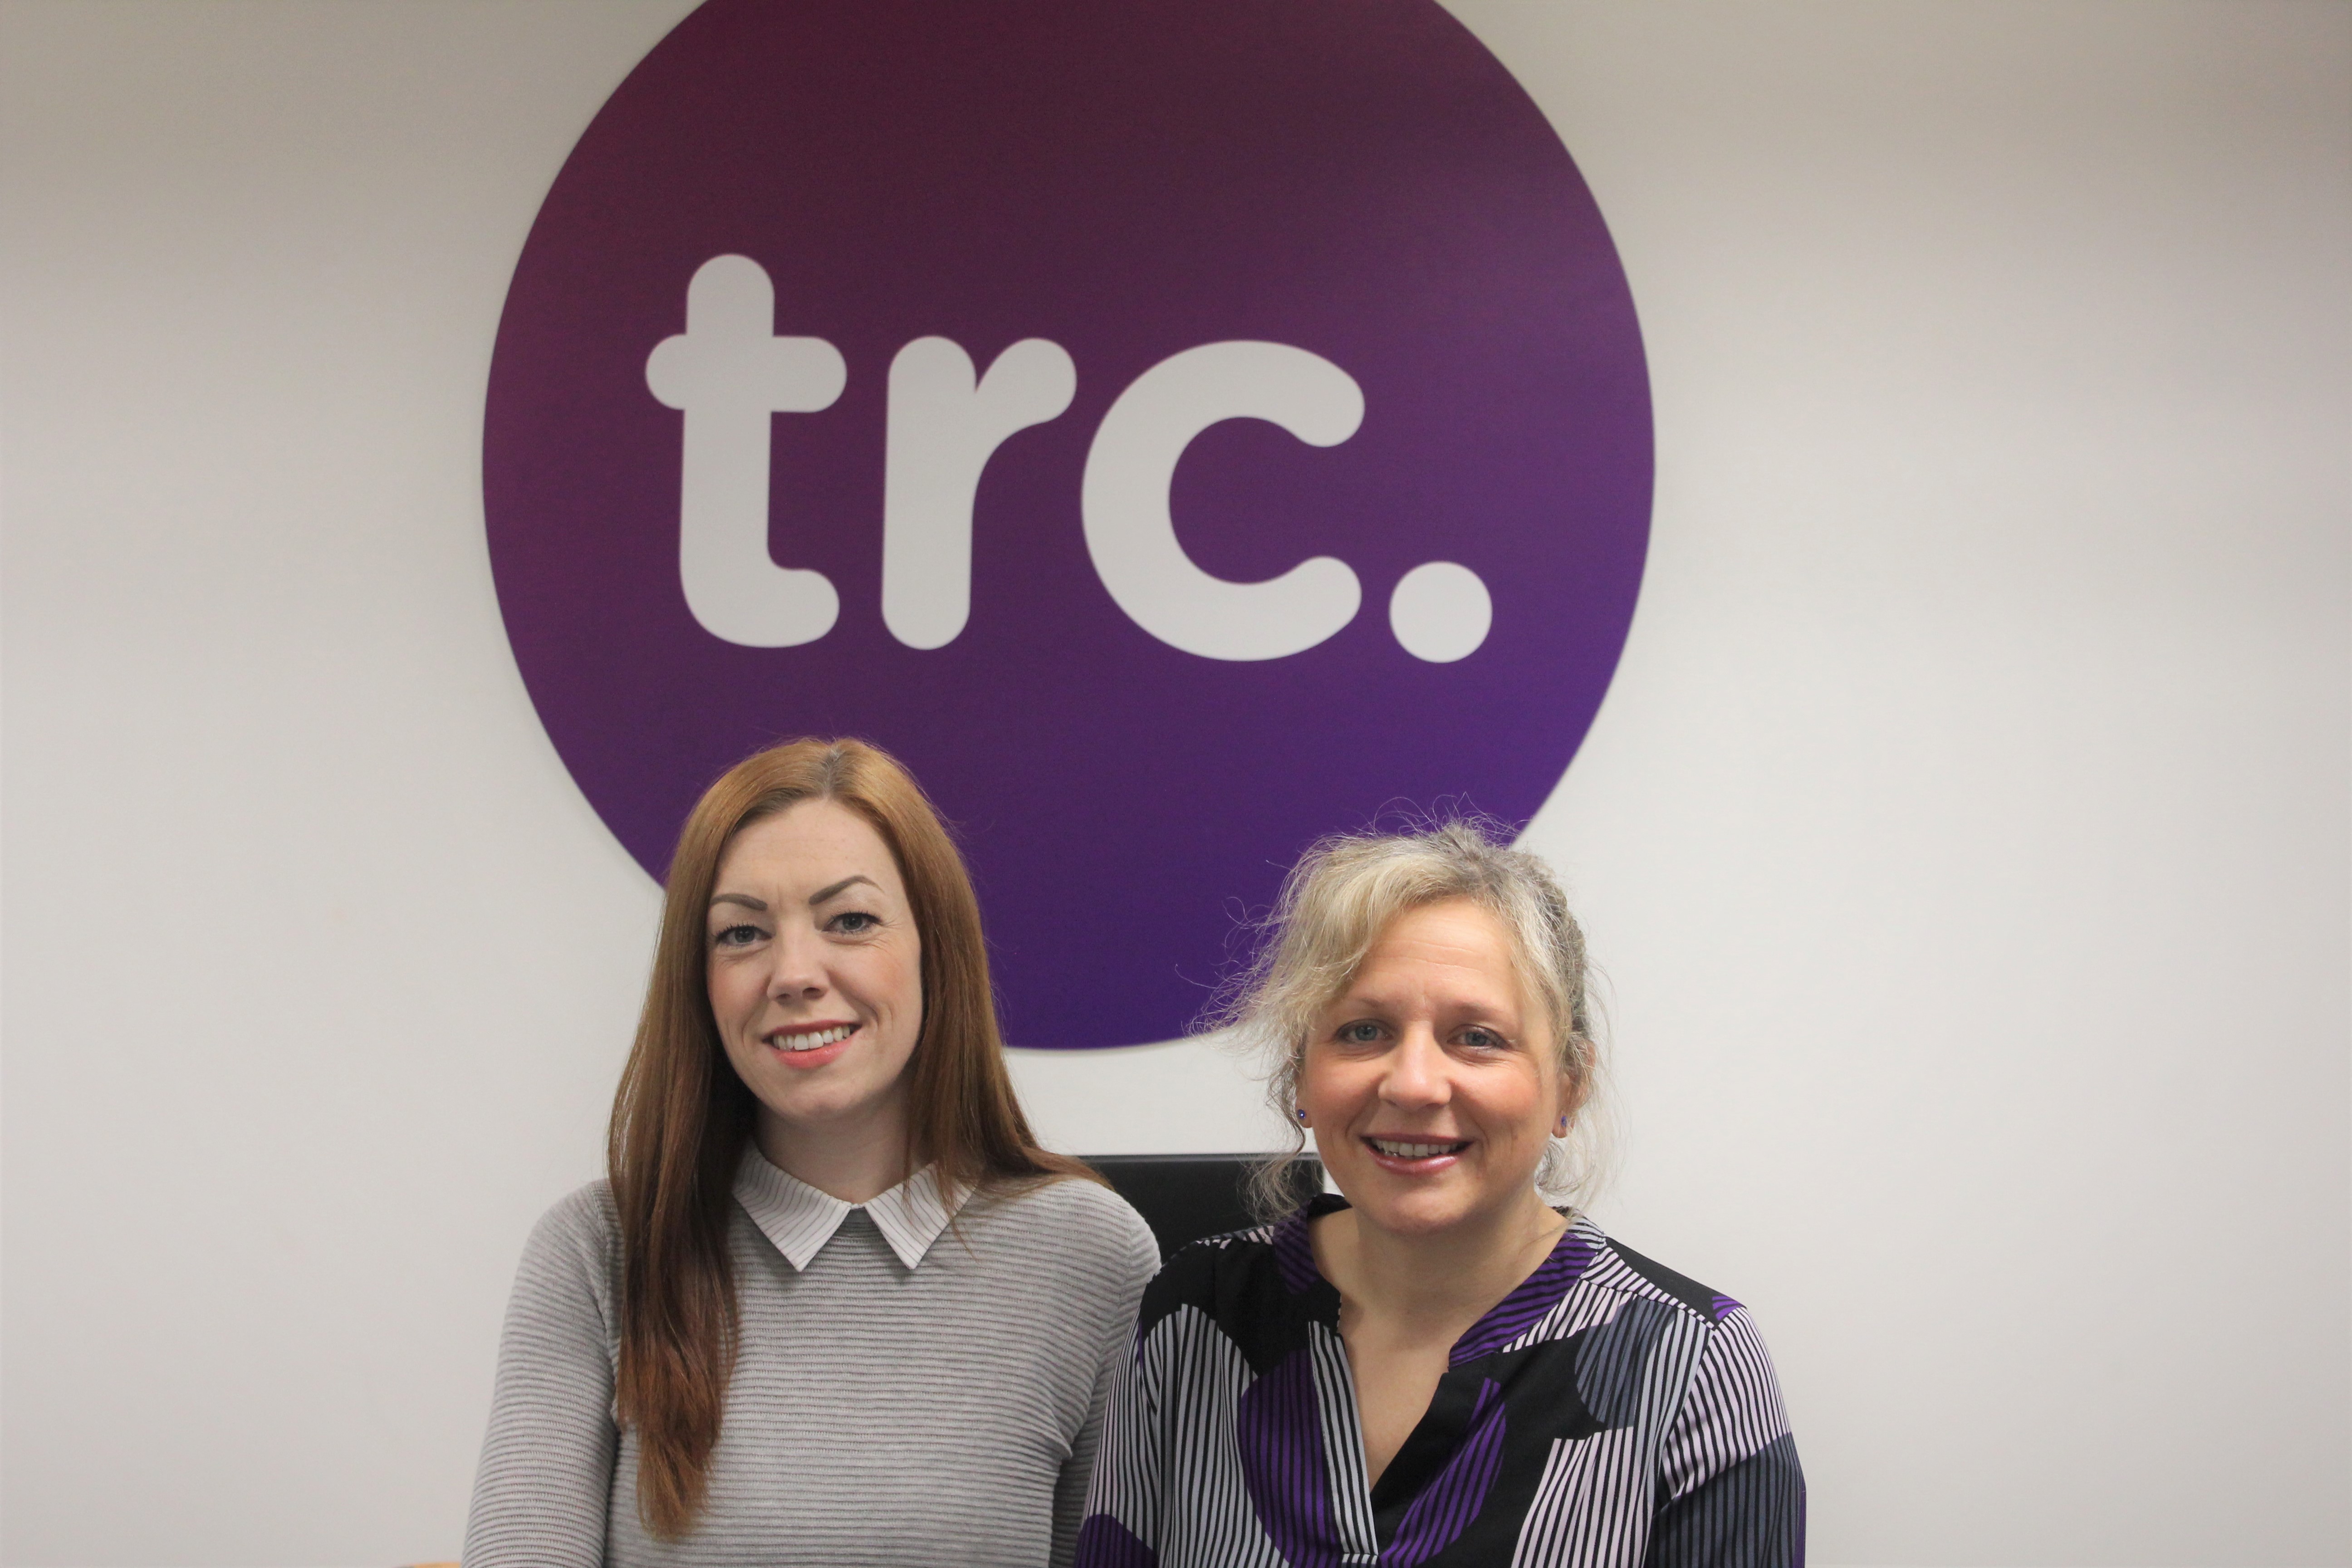 Caroline and Suzanne in front of TRC logo.